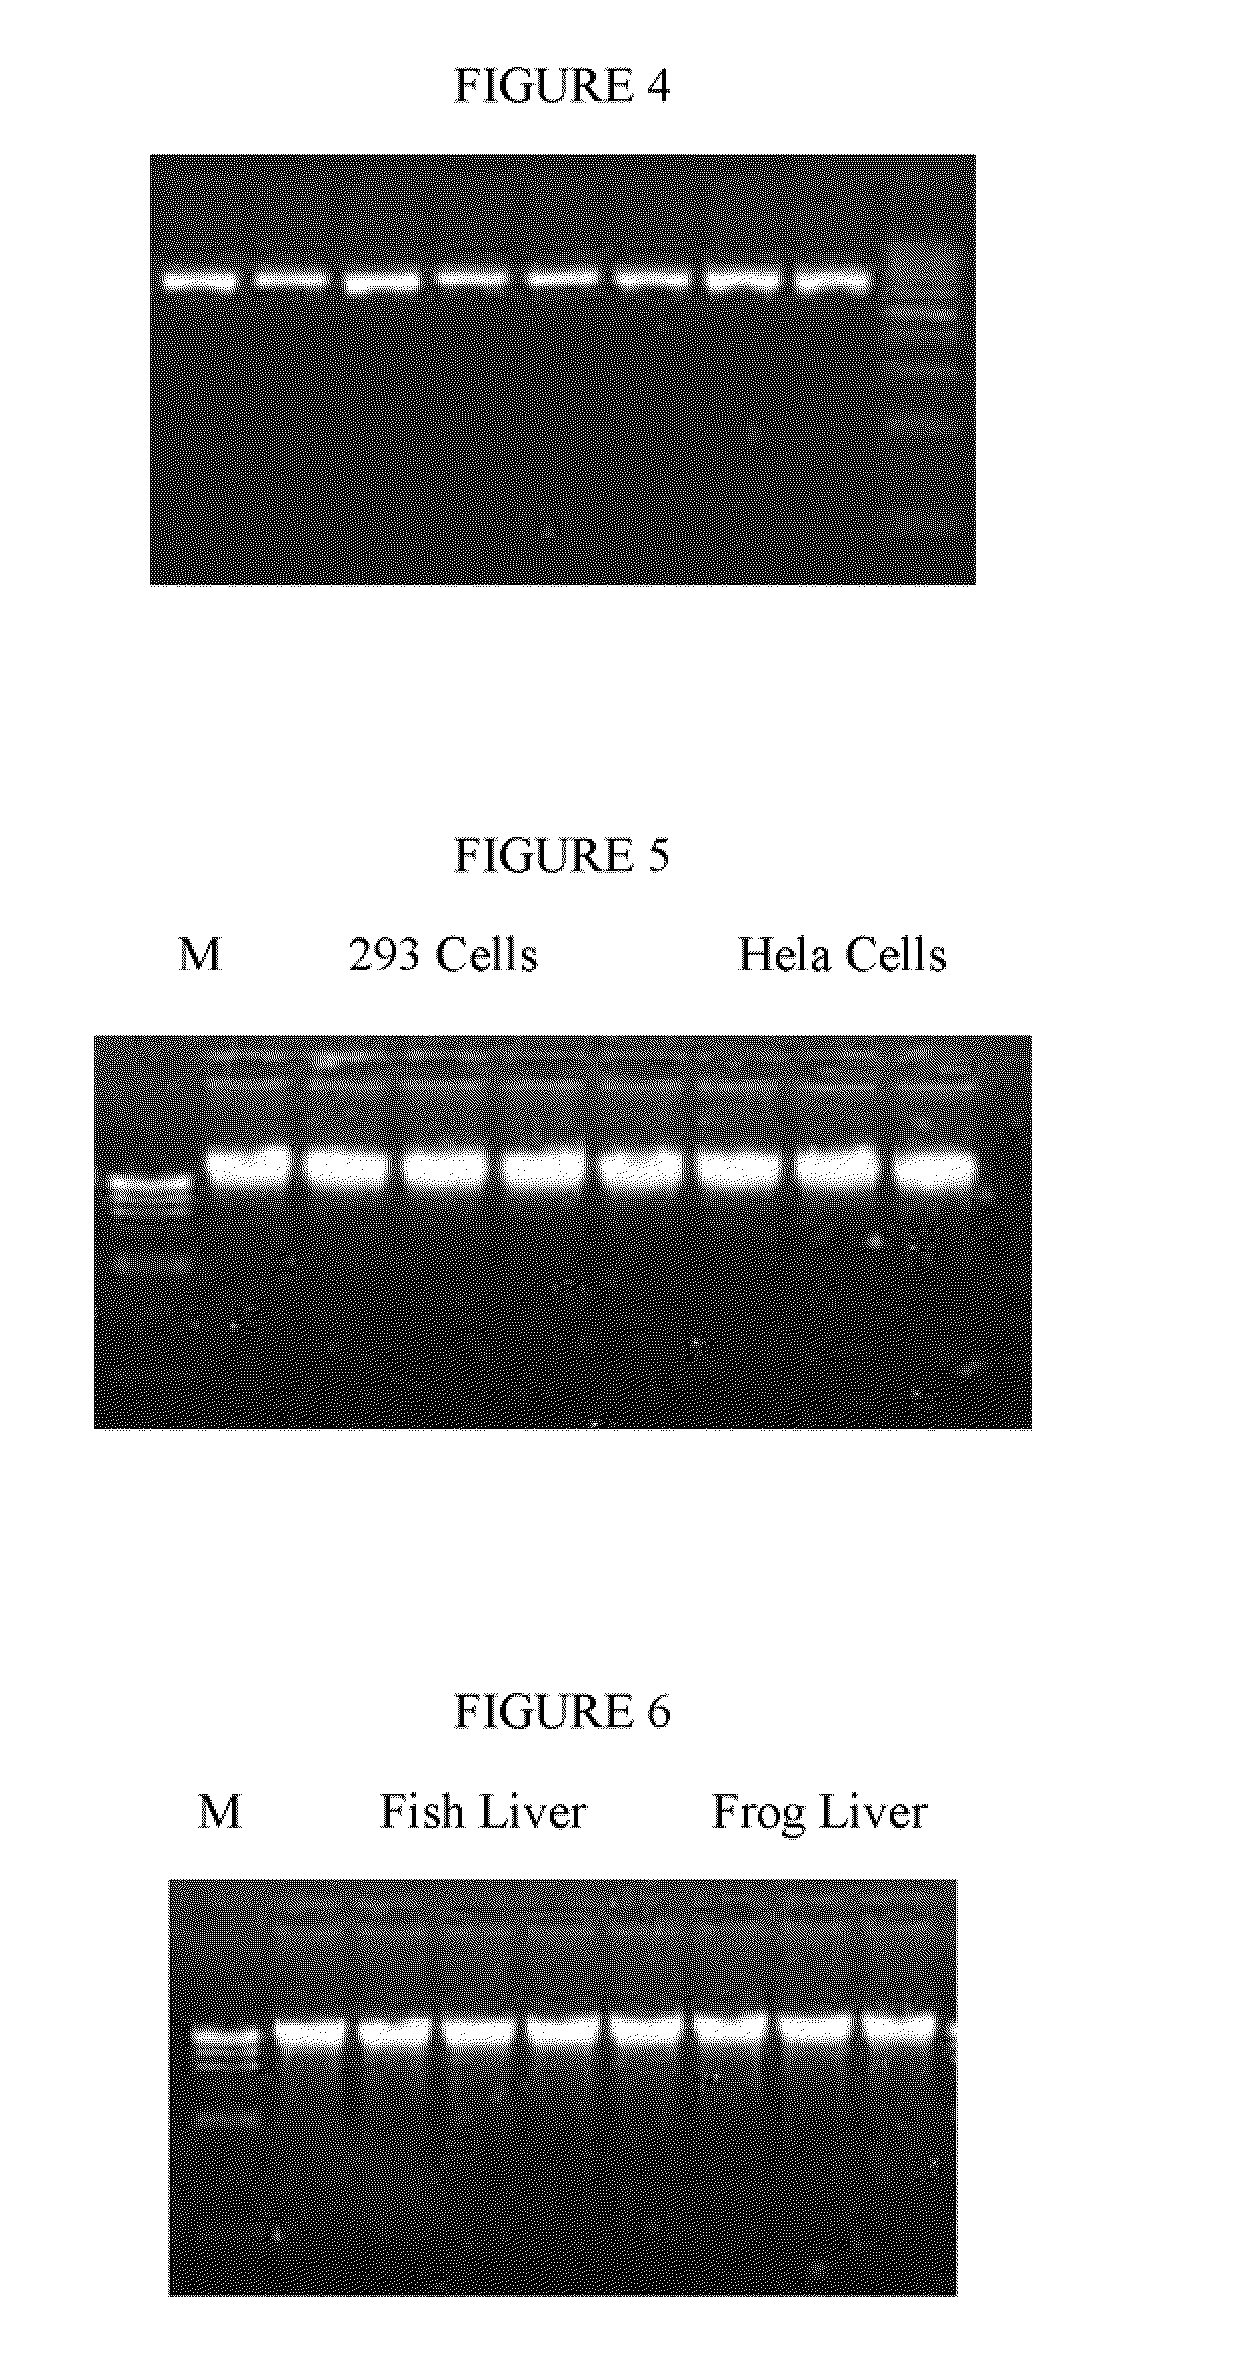 Method of Isolation of Nucleic Acids